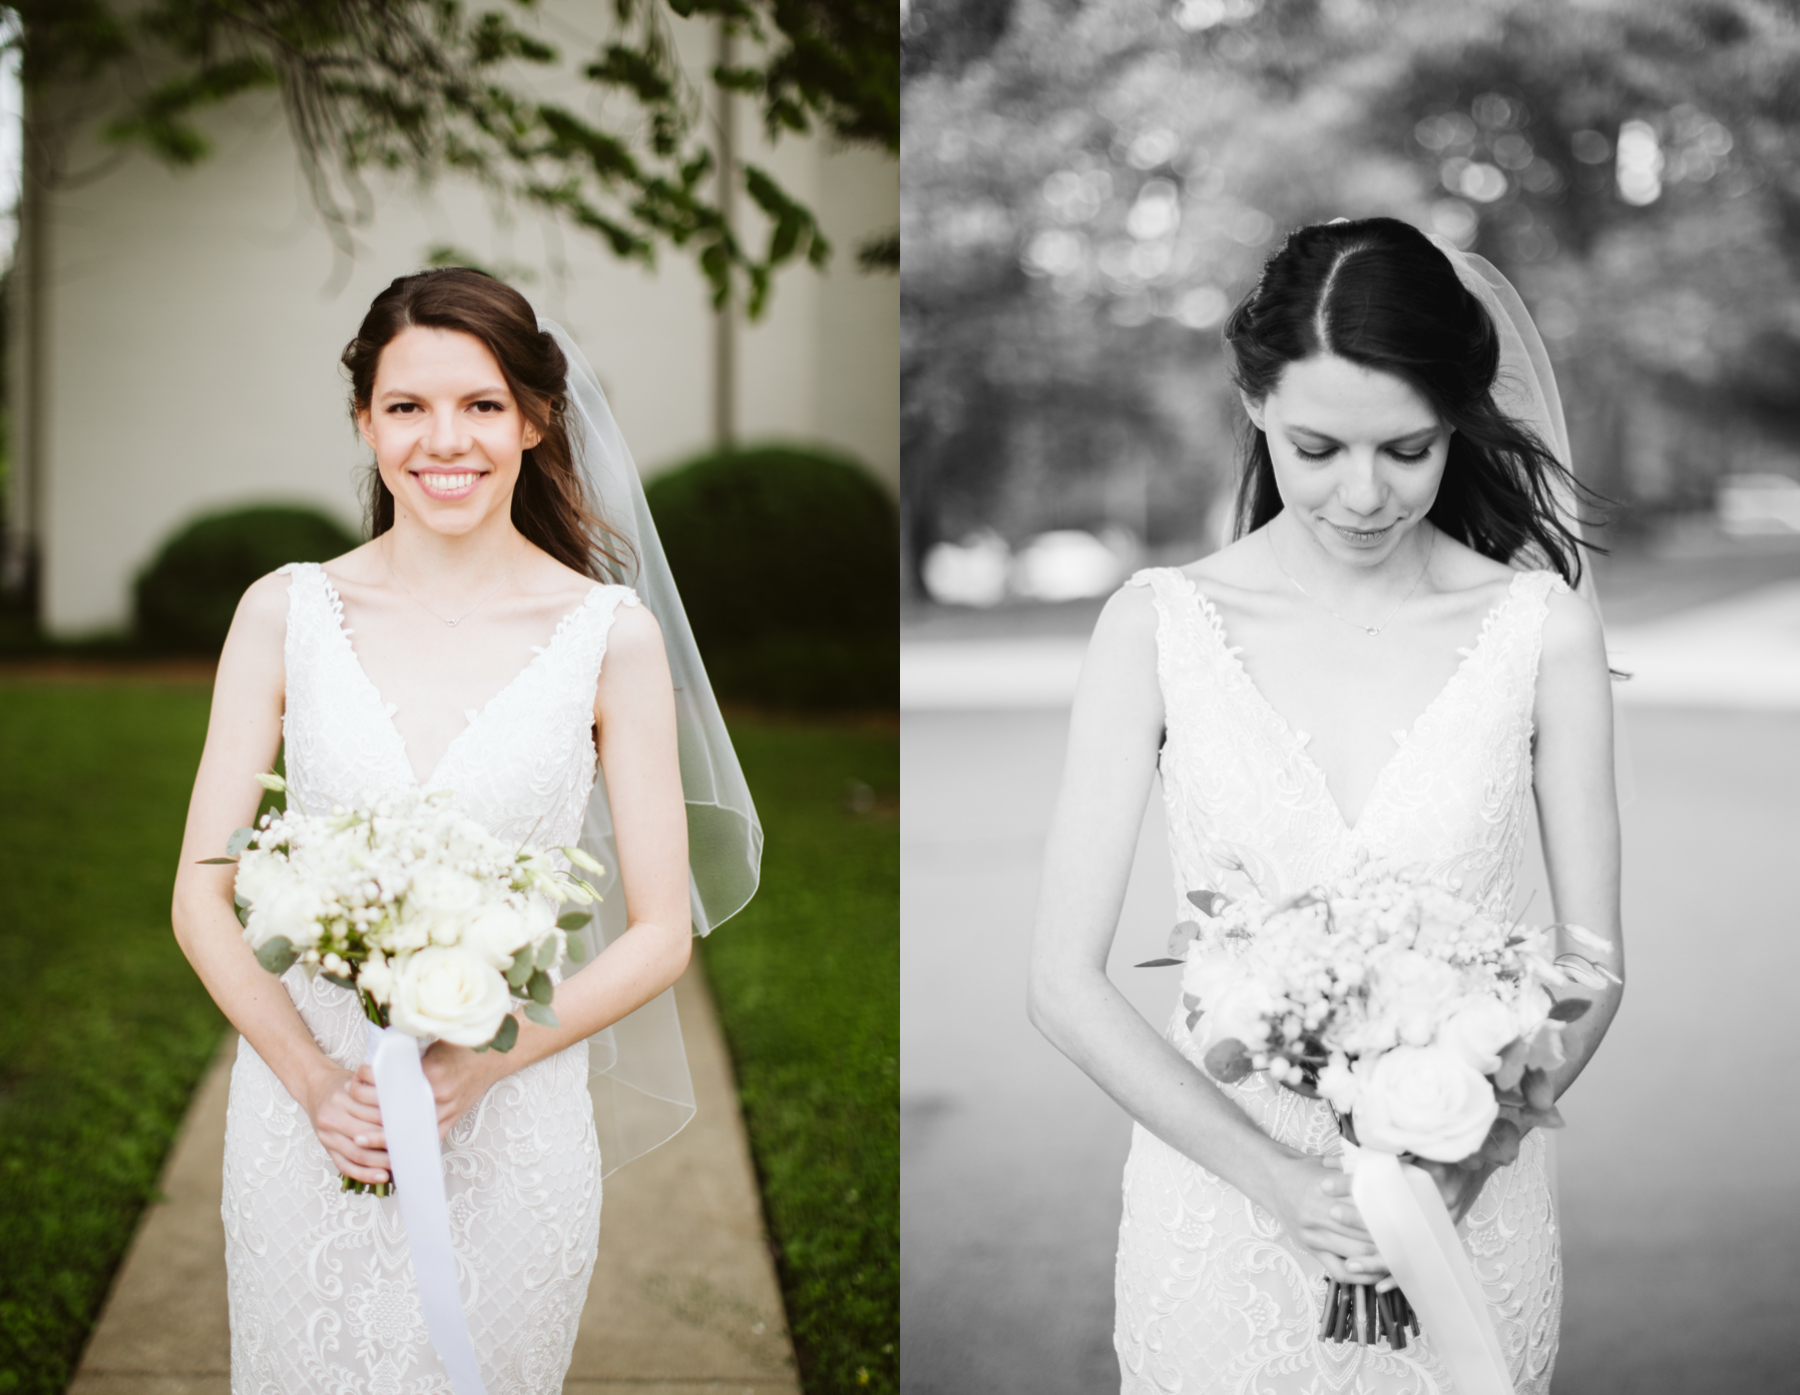 Bridal portraits at a rainy summer wedding at brentwood hills church in Nashville, tennessee